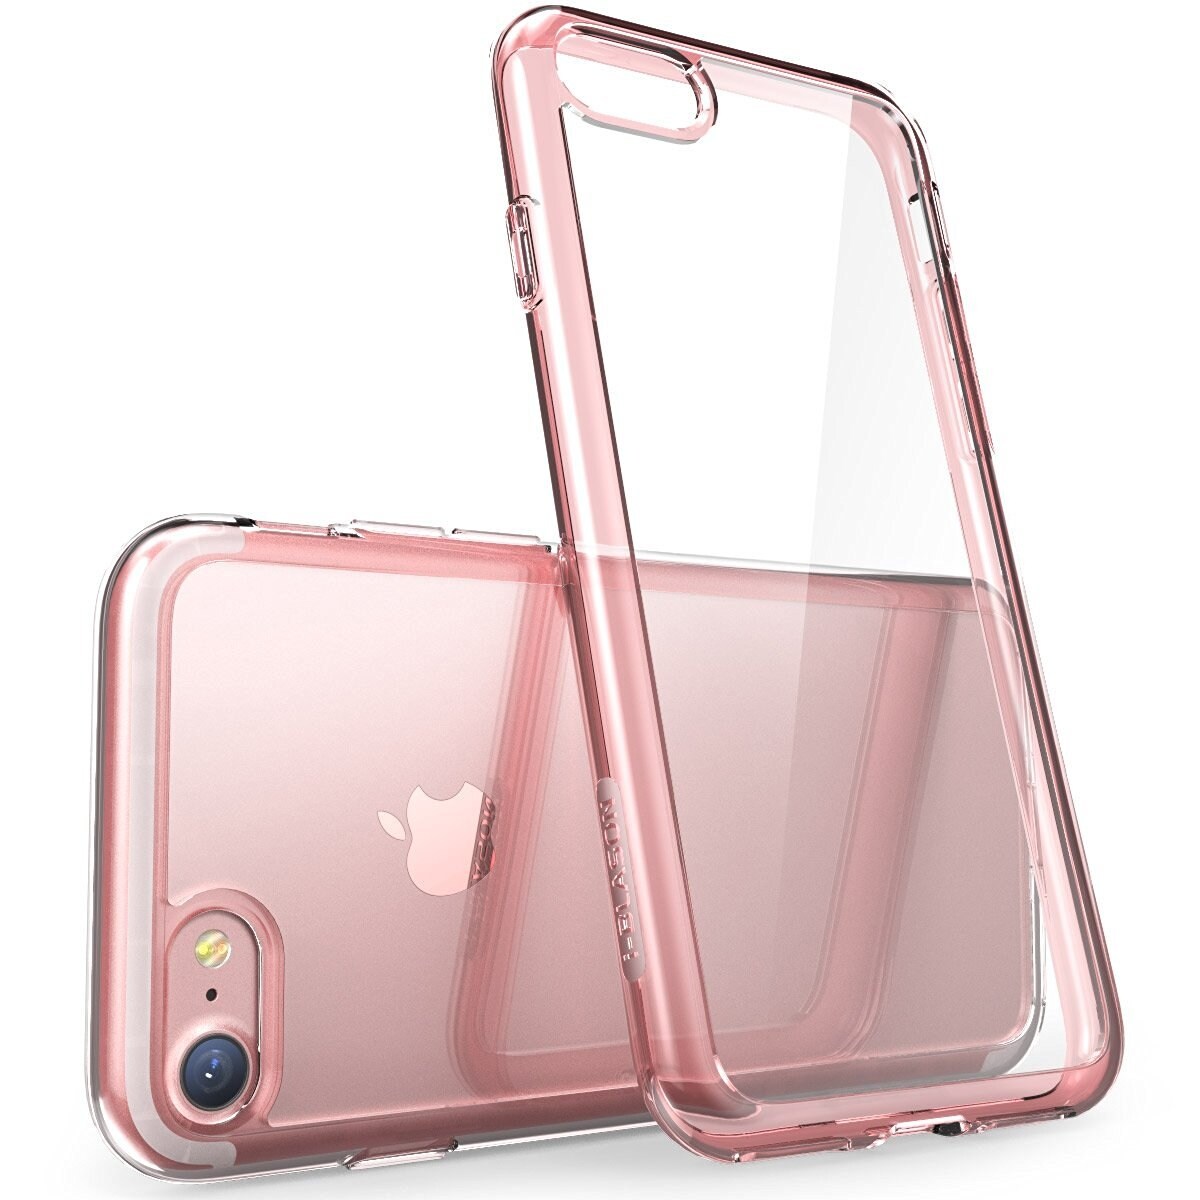 iPhone 7 Case, Scratch Resistant, i-Blason, Clear Series, for Apple iPhone 7 2016 Release (Clear/Rose Gold) - Overstock - 16774581